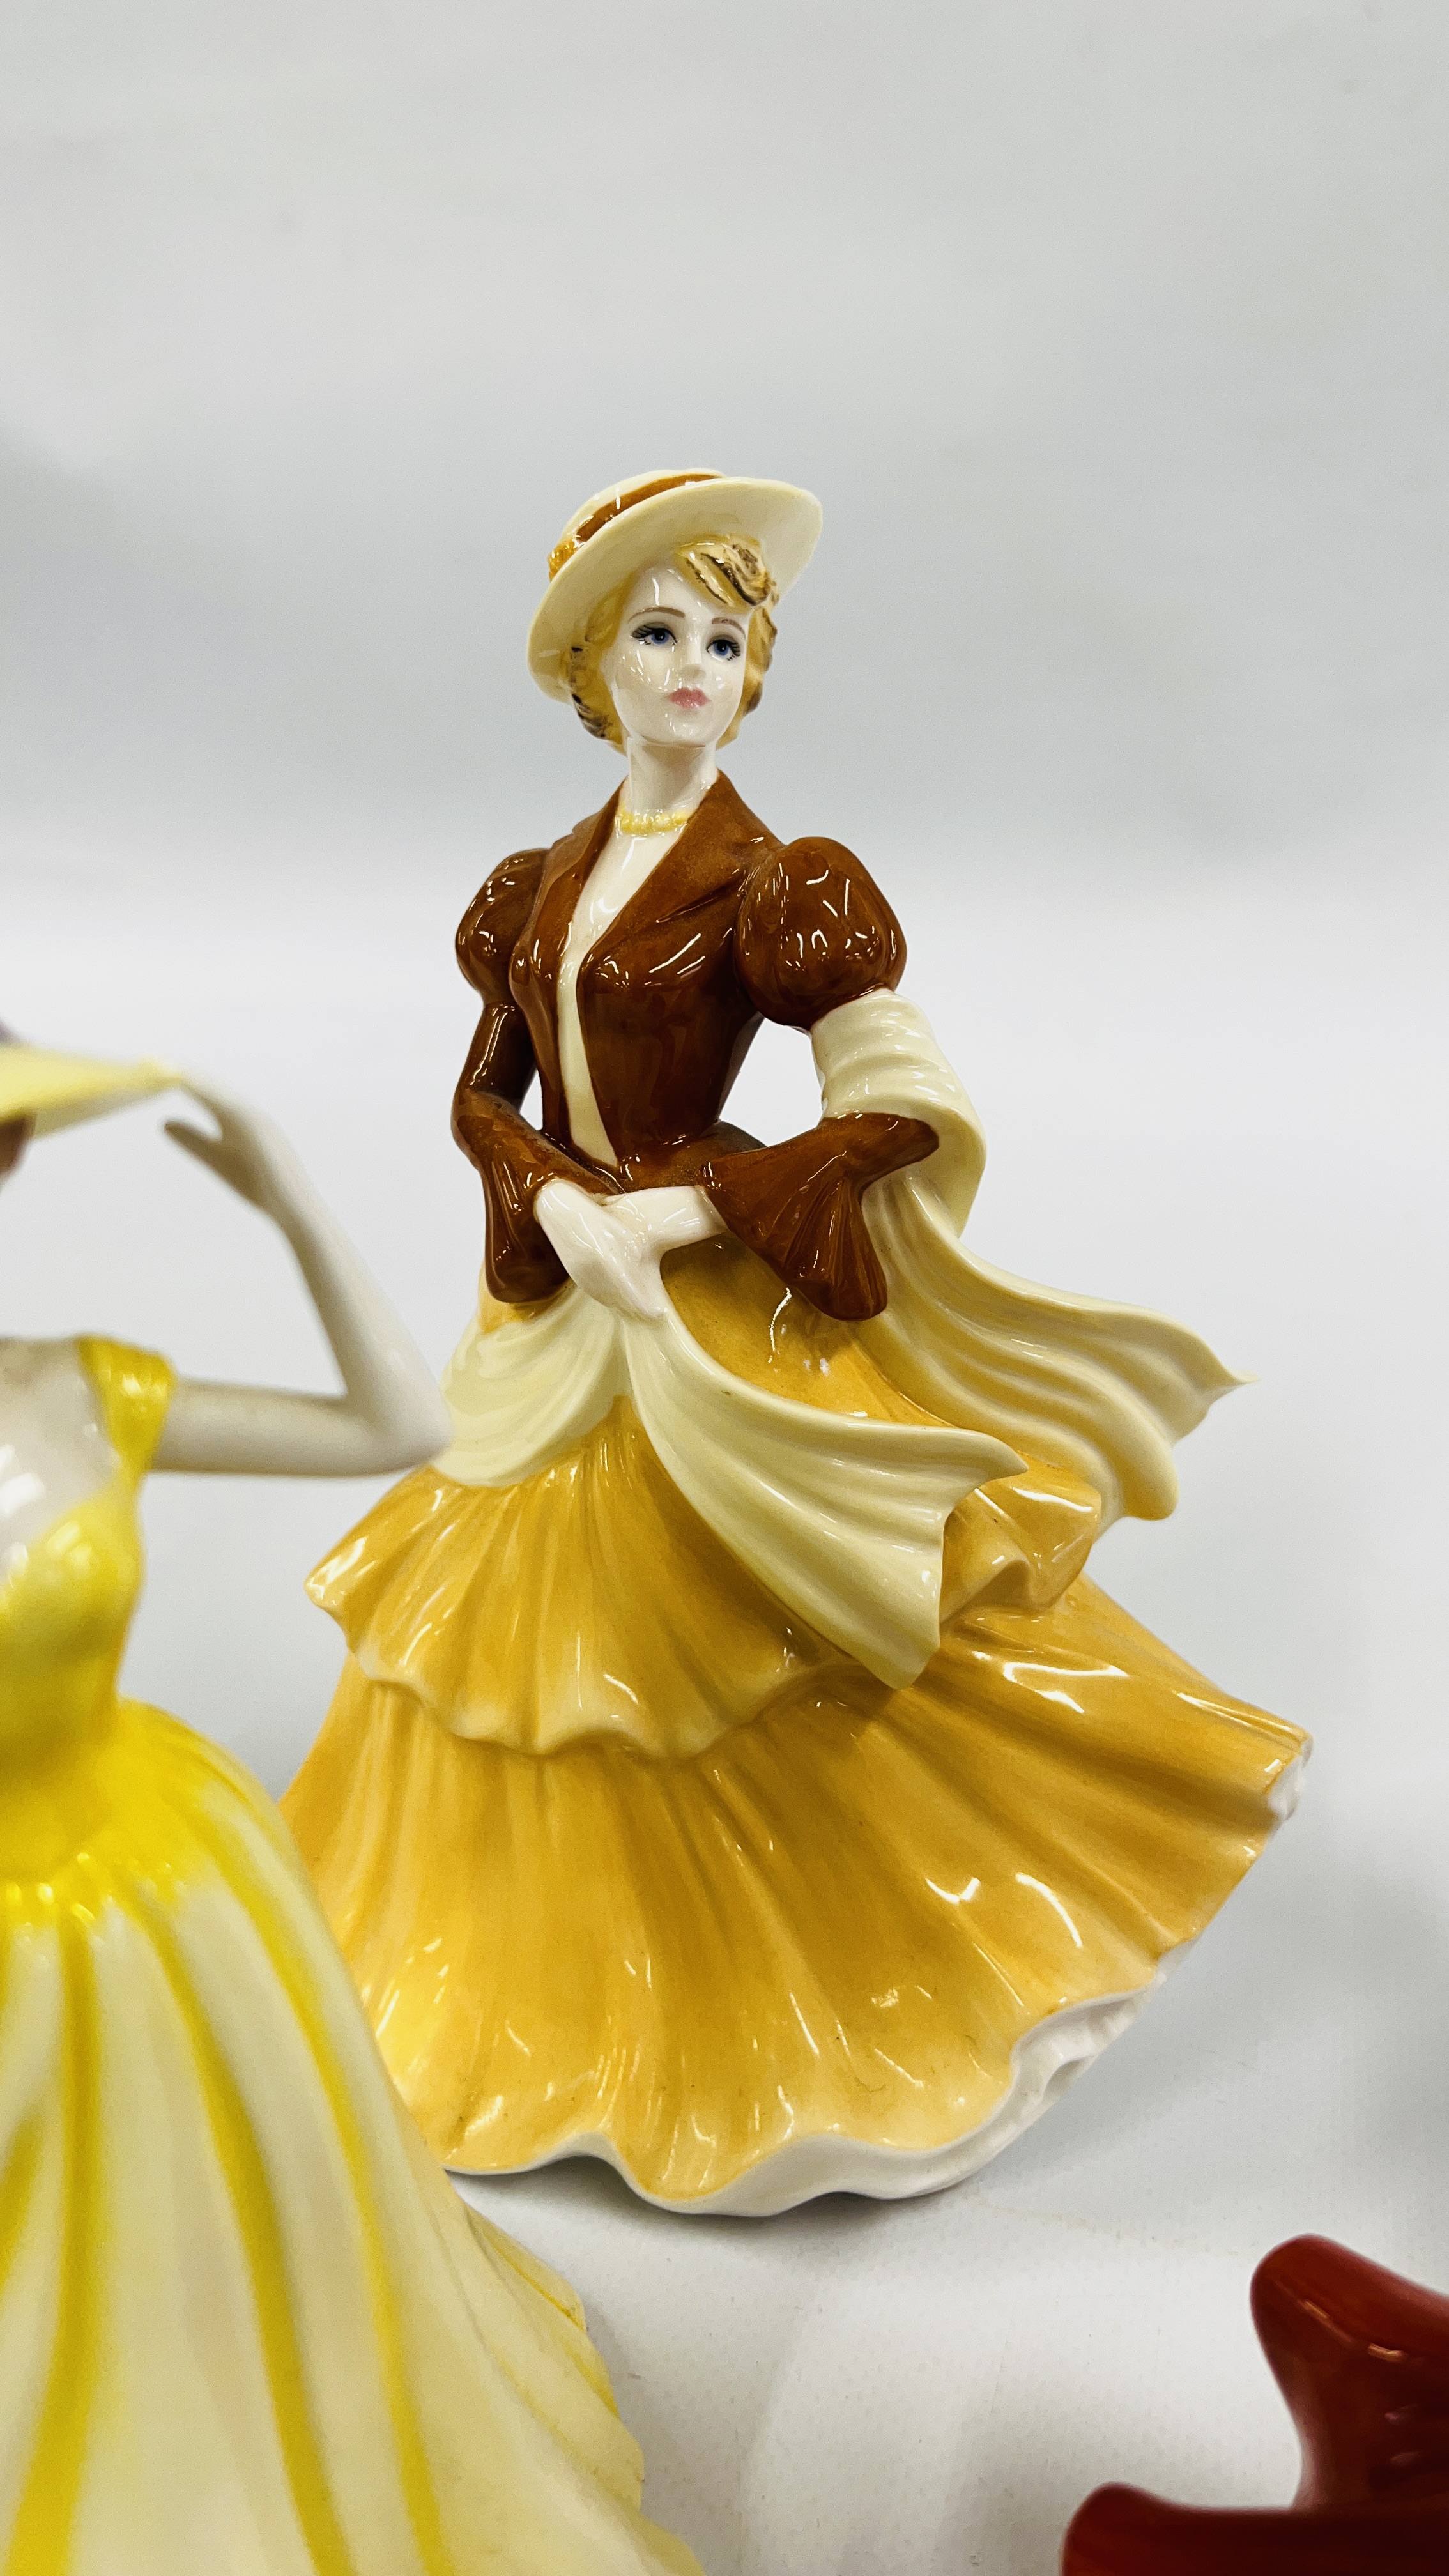 3 ROYAL DOULTON CABINET COLLECTORS FIGURES TO INCLUDE "SUMMER BREEZE" HN 4587, - Image 5 of 9